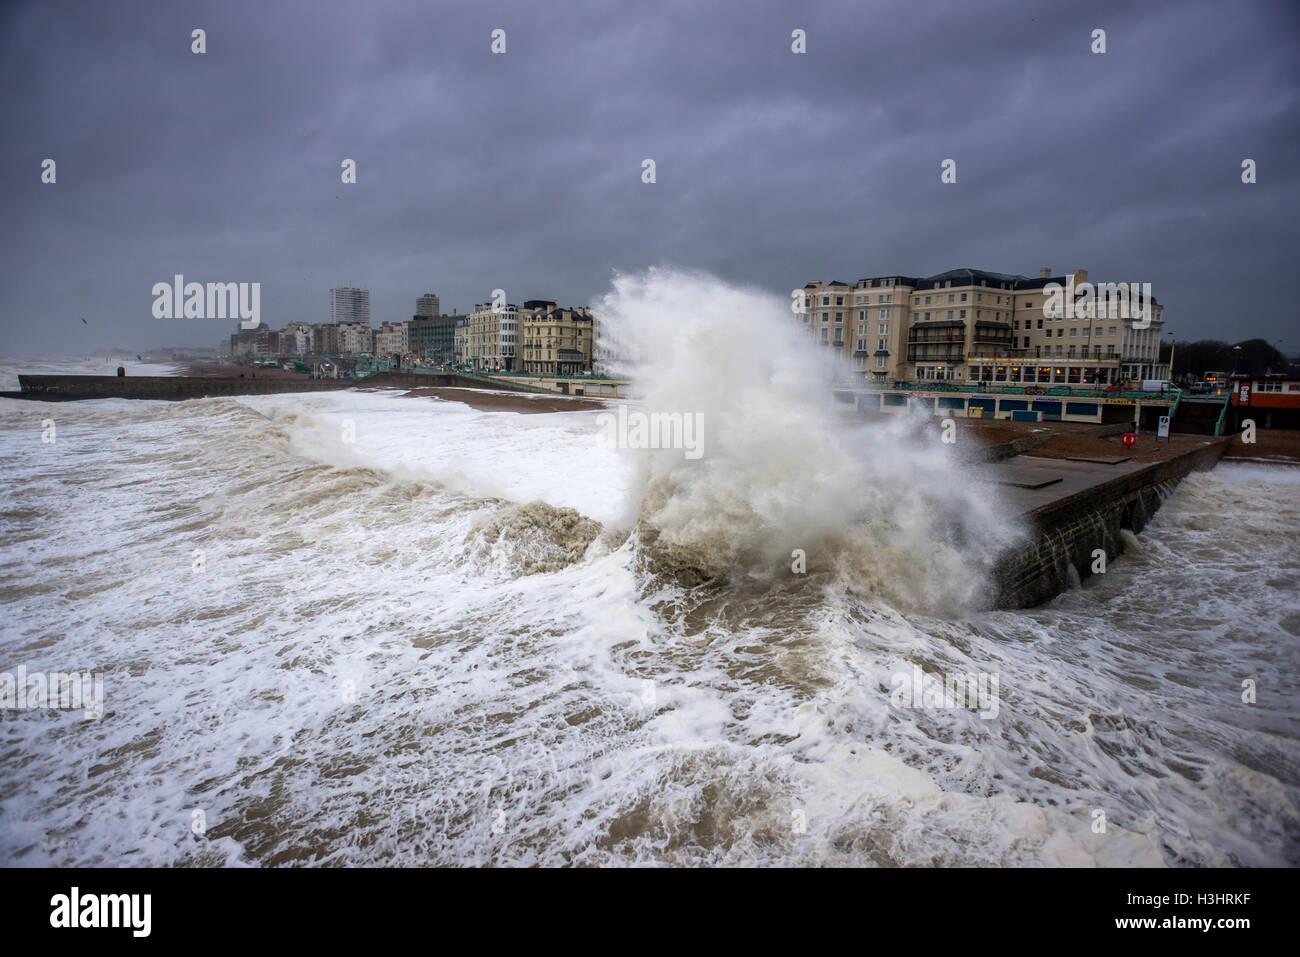 Waves crashing onto the beach during a winter storm Stock Photo